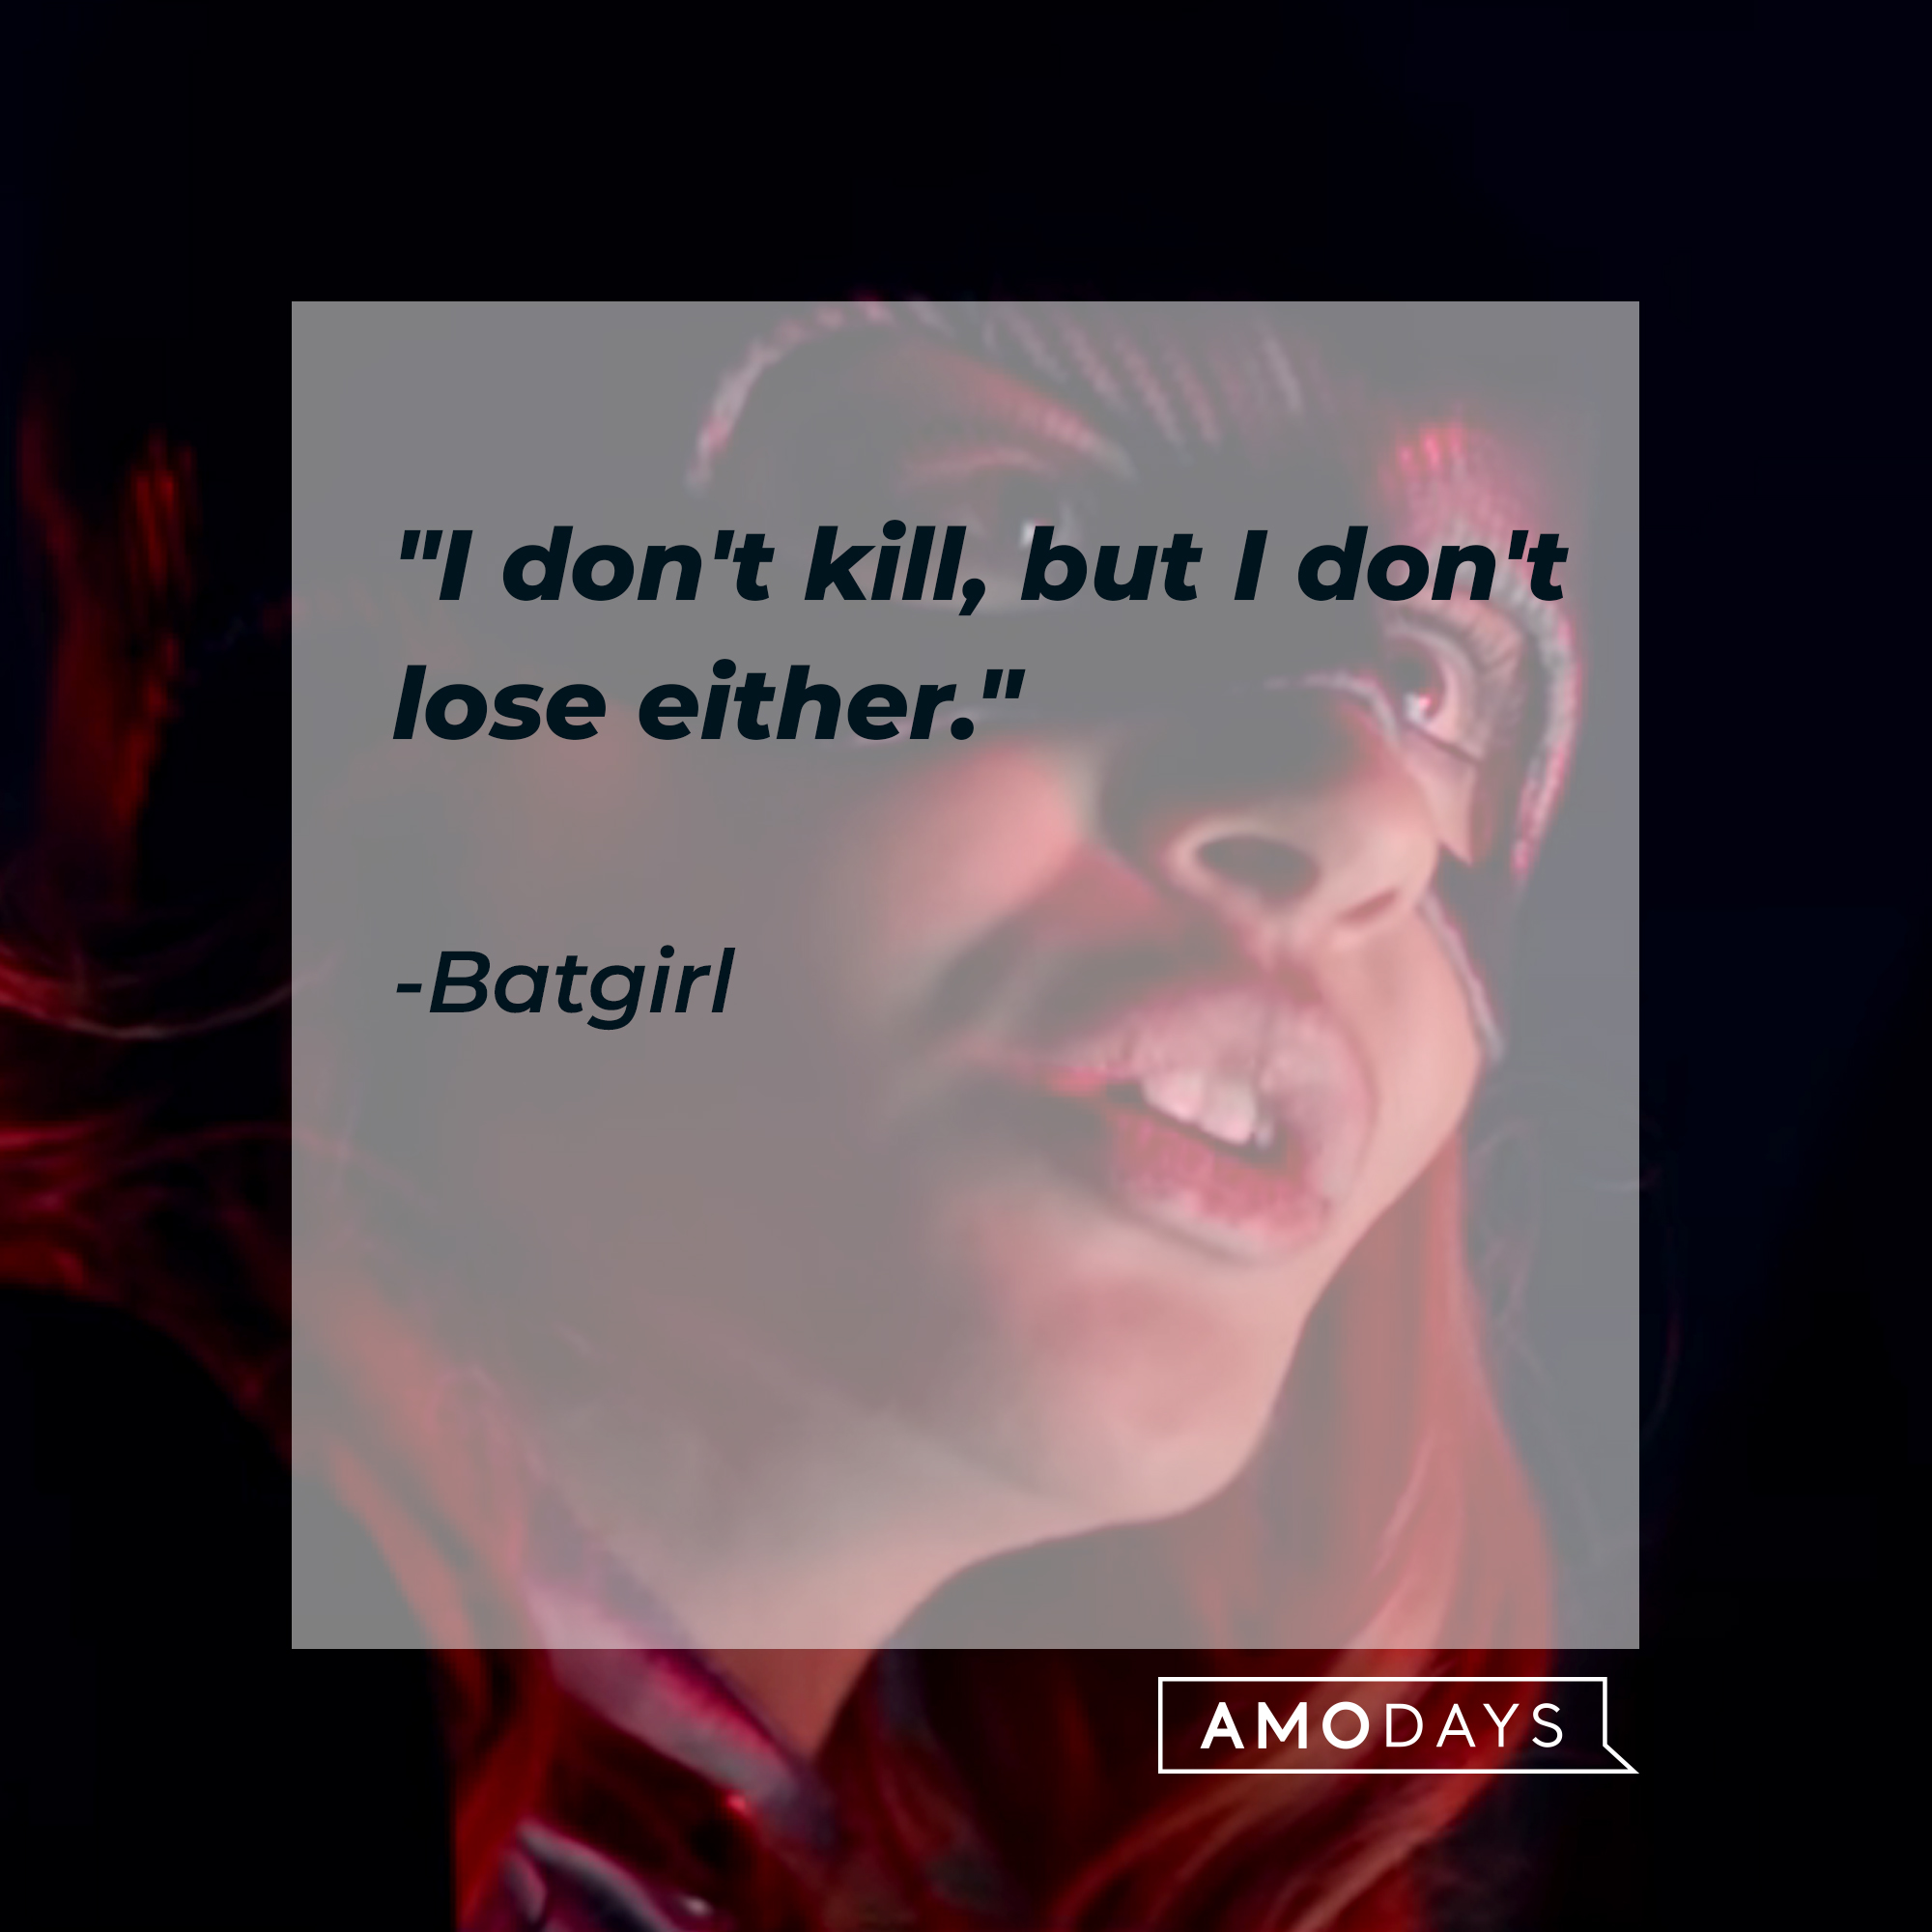 Batgirl's quote: "I don't kill, but I don't lose either." | Source: facebook.com/dc